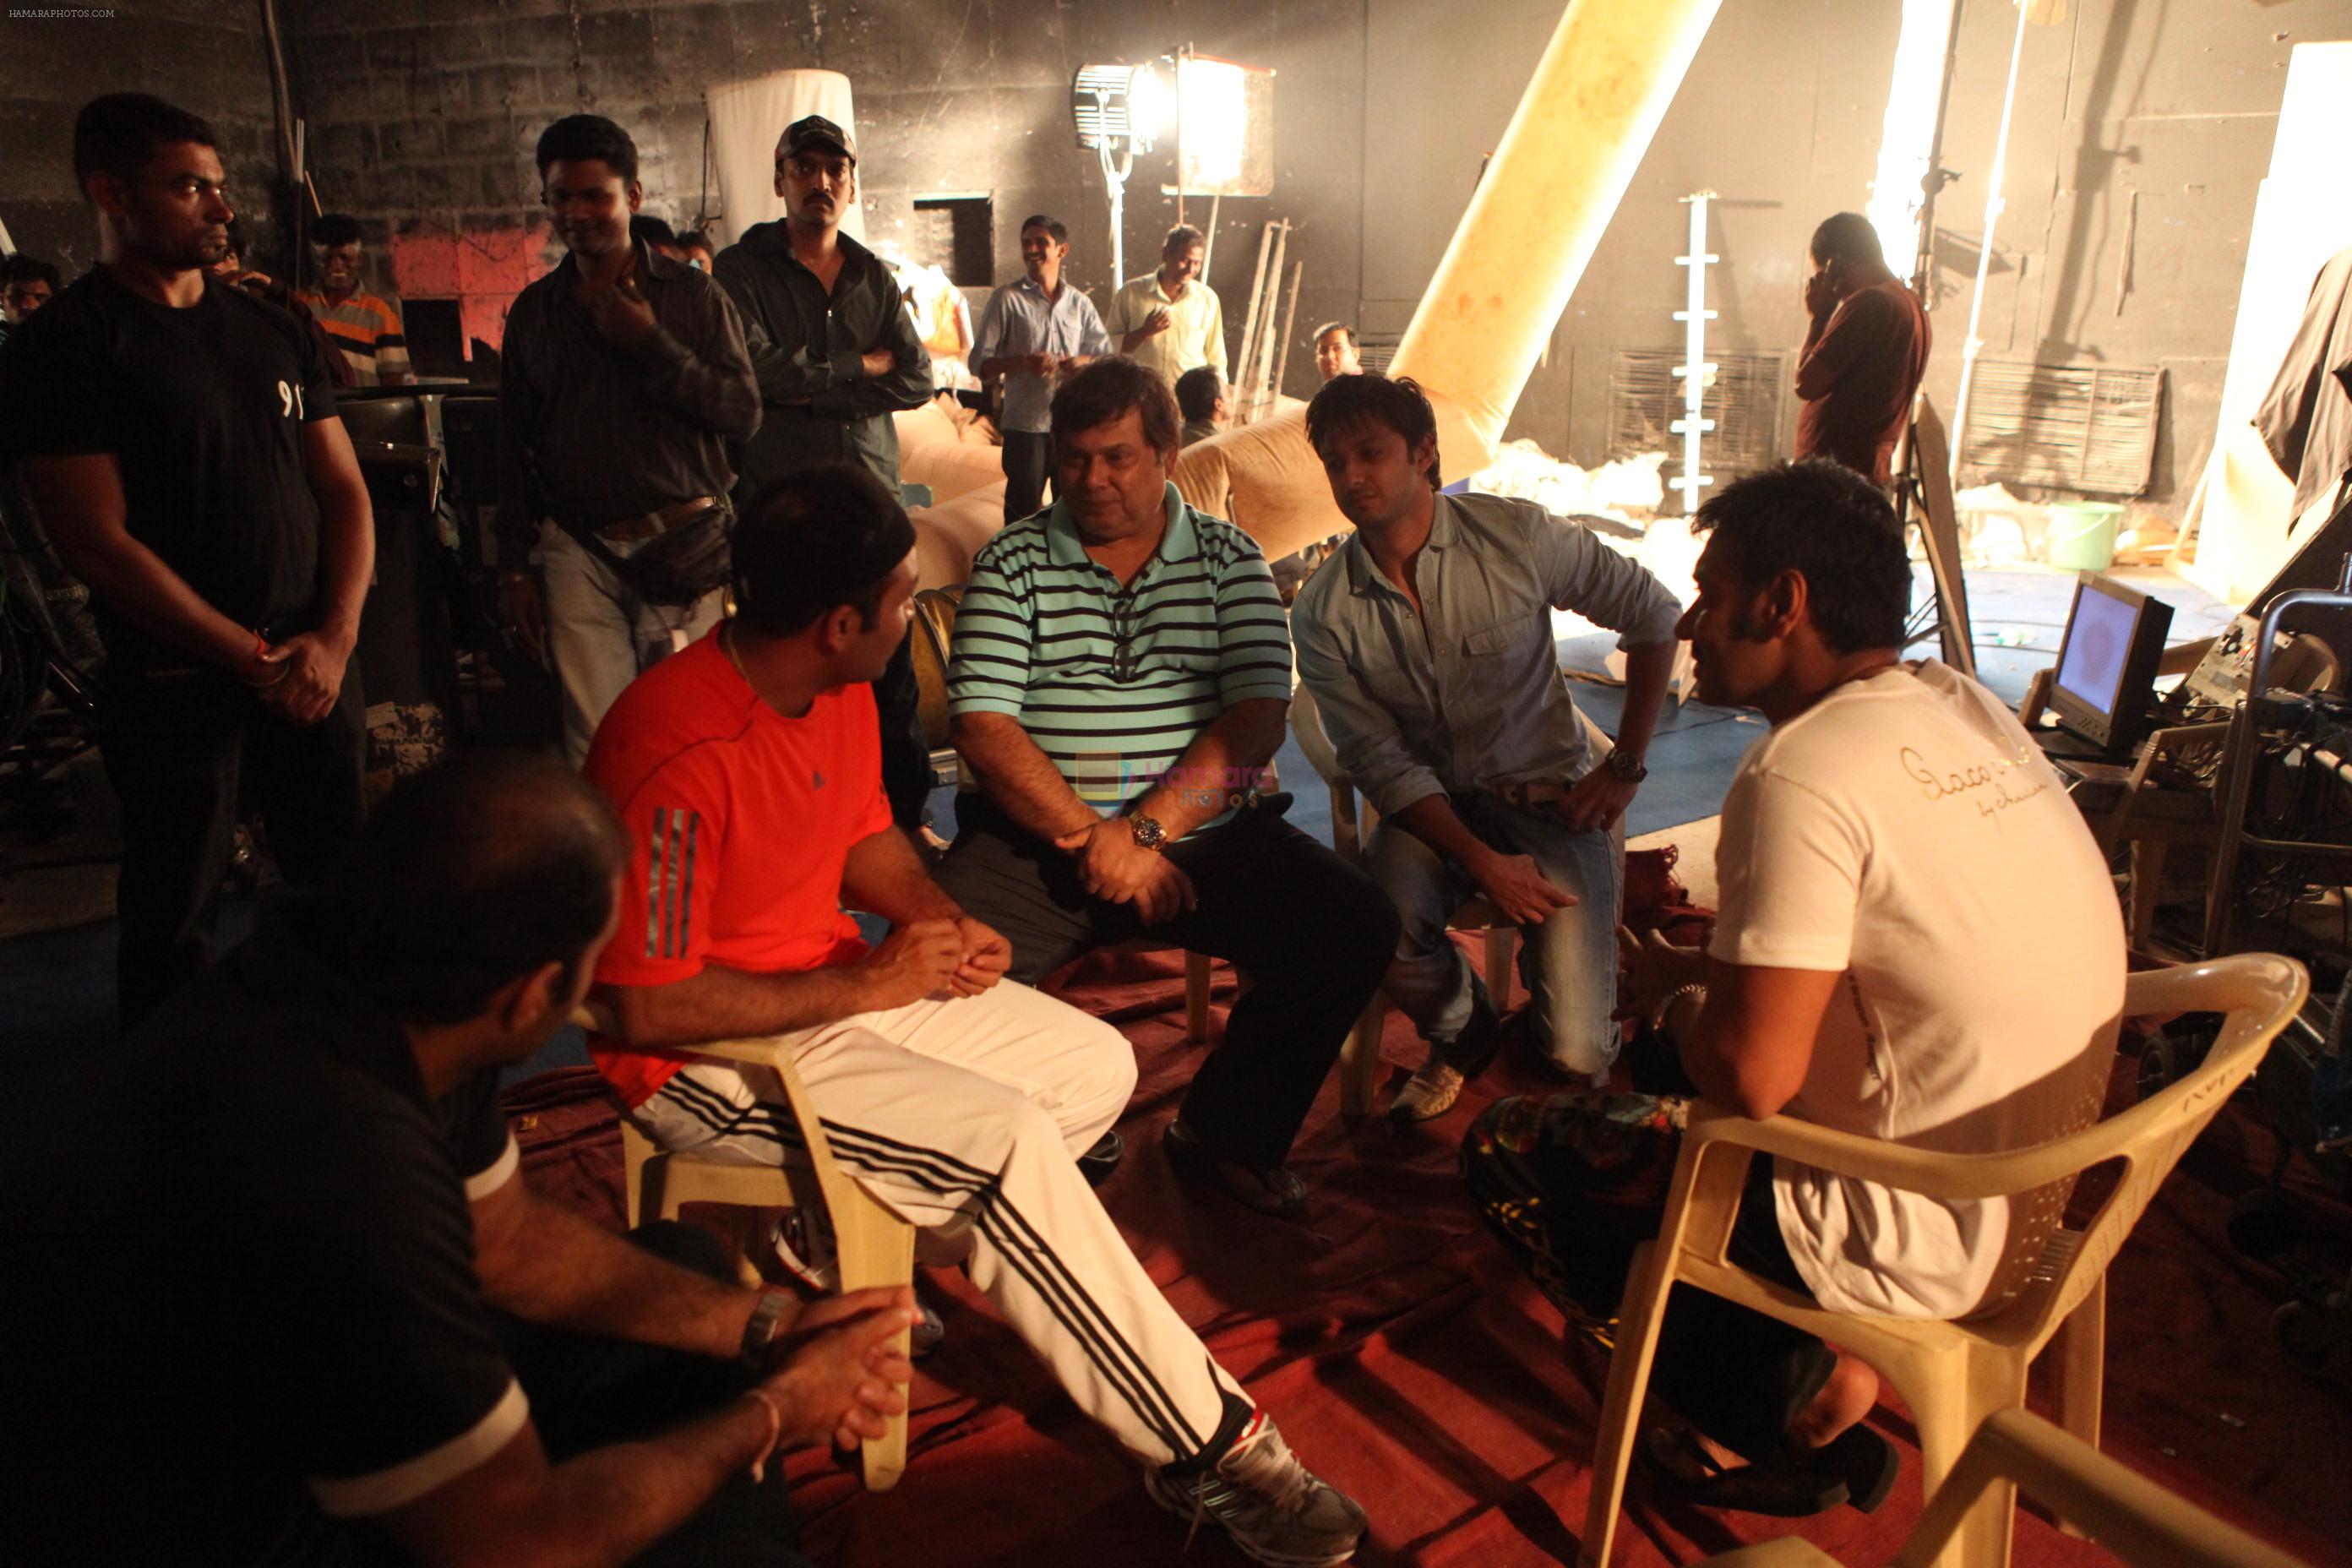 Virender Sehwaf, David Dhawan, Vatsal Seth and Ajay Devgn on the sets of film Rascals on 16th Sept 2011